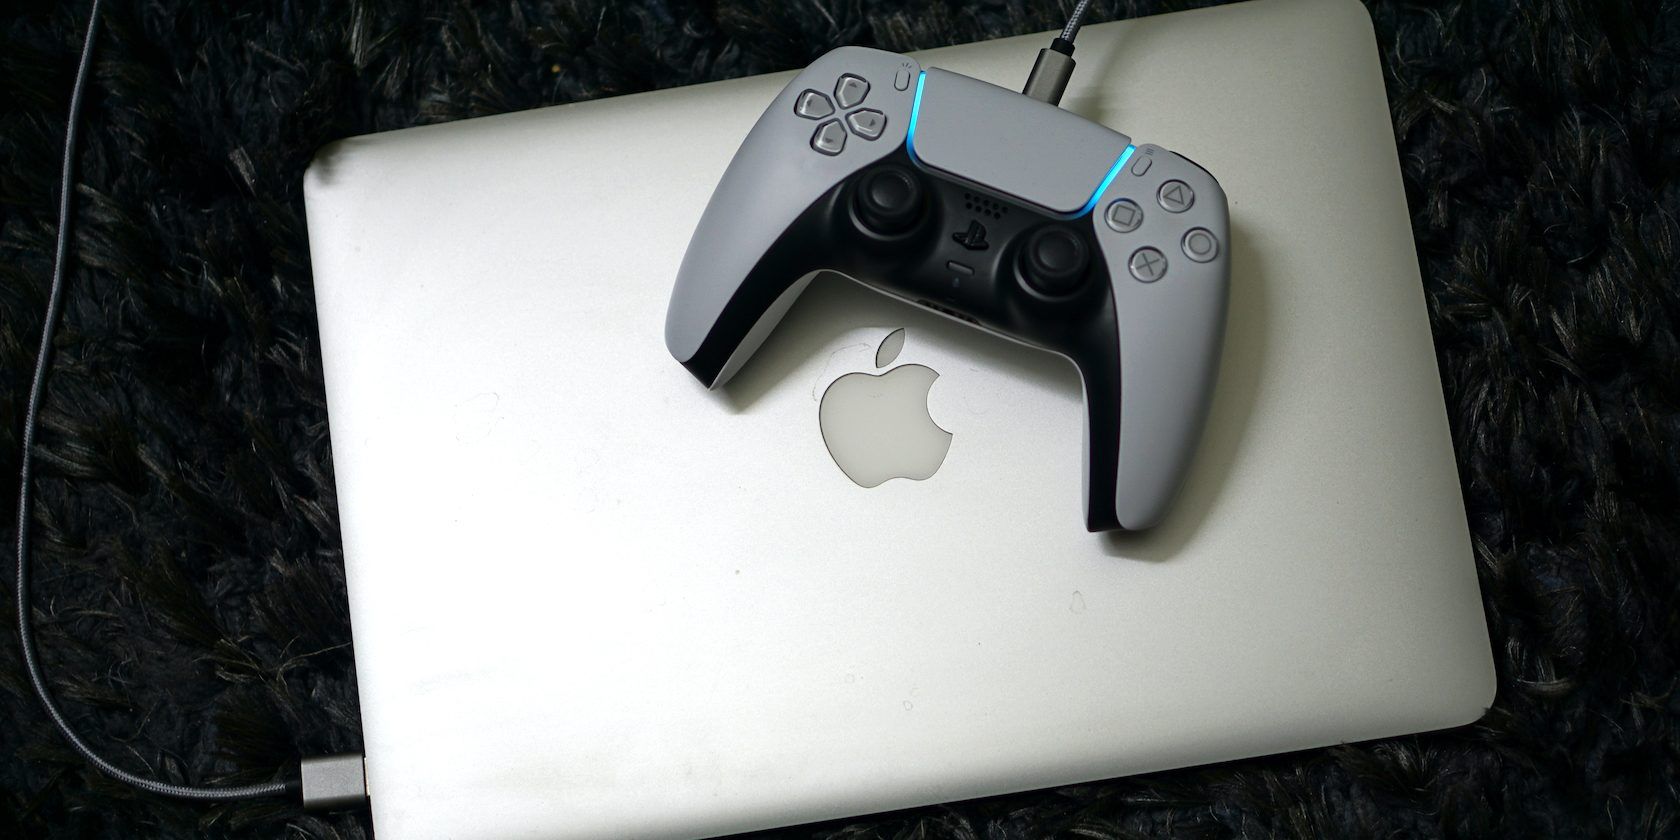 connect xbox360 controller to mac for steam games